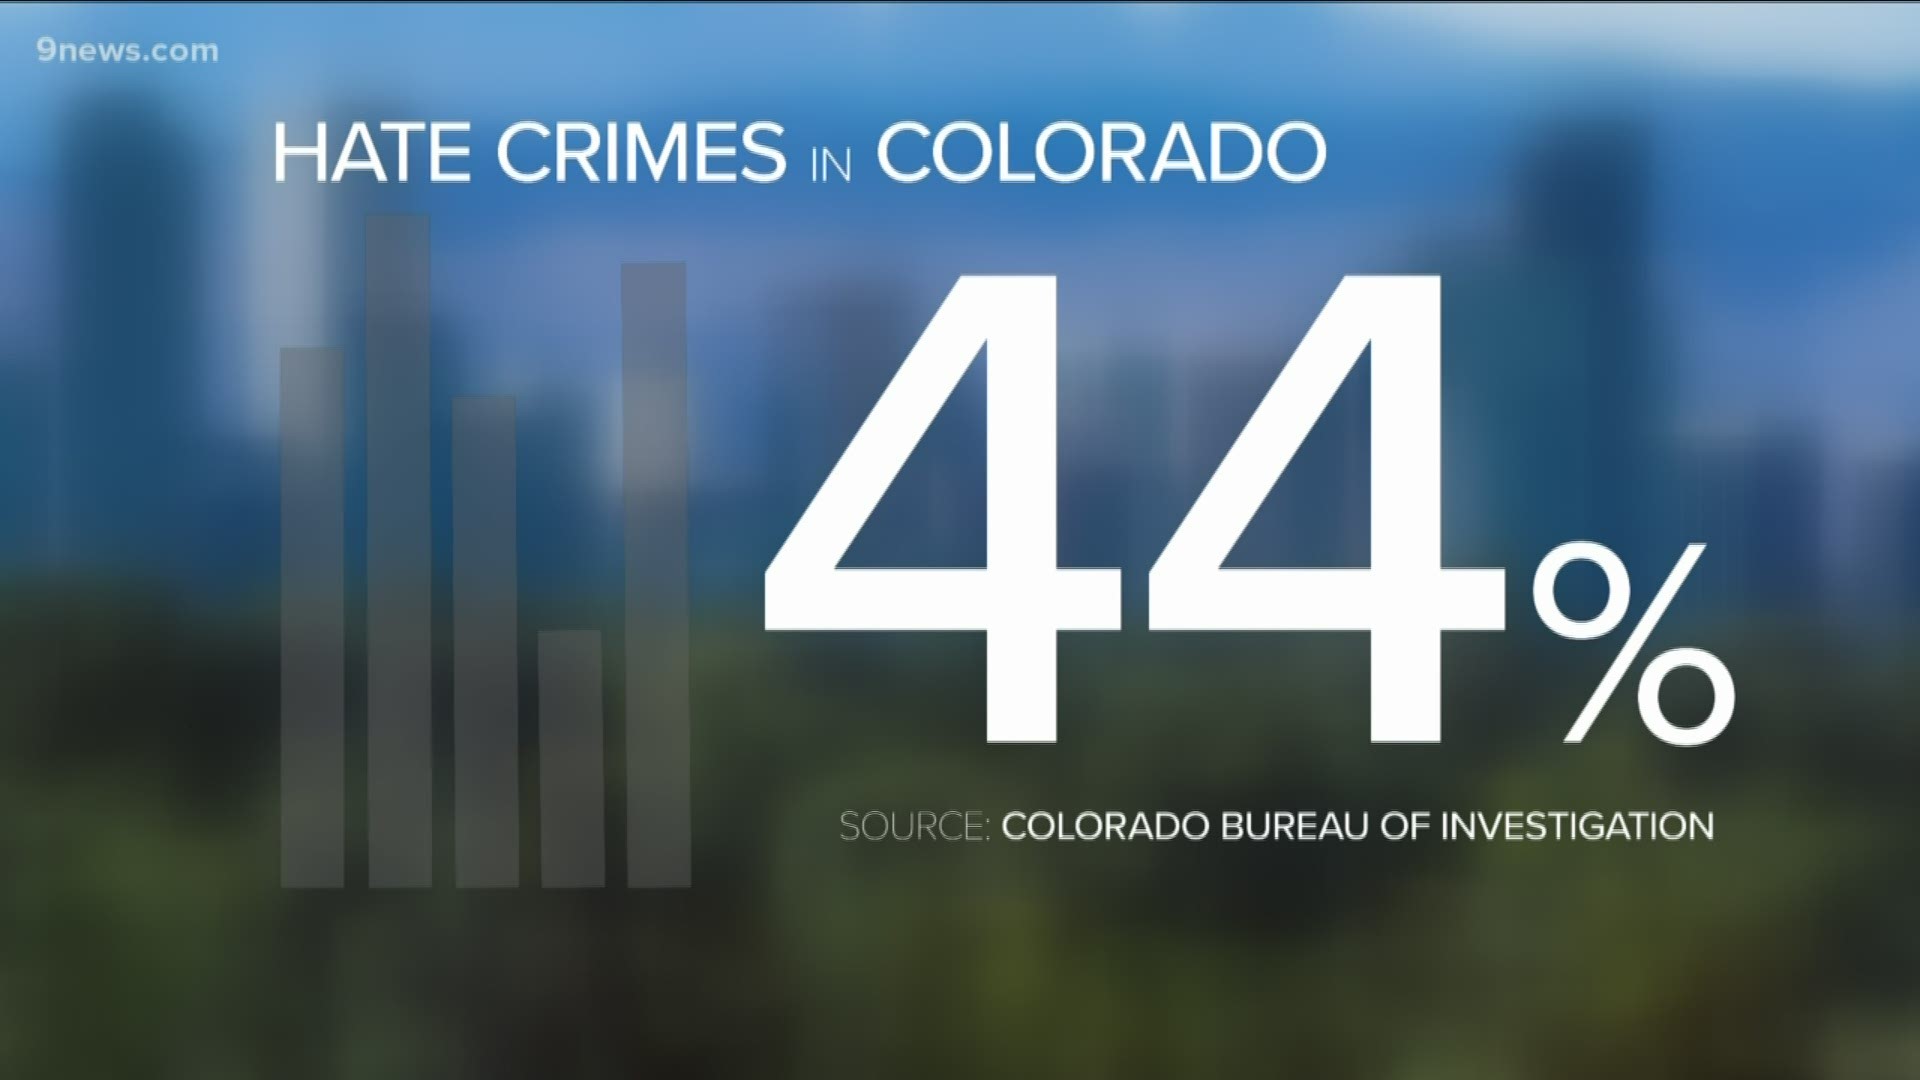 Recent hate crime reports indicate Colorado has a growing problem with hate groups displaying their racism through rallies, protests, vandalism and even violence.